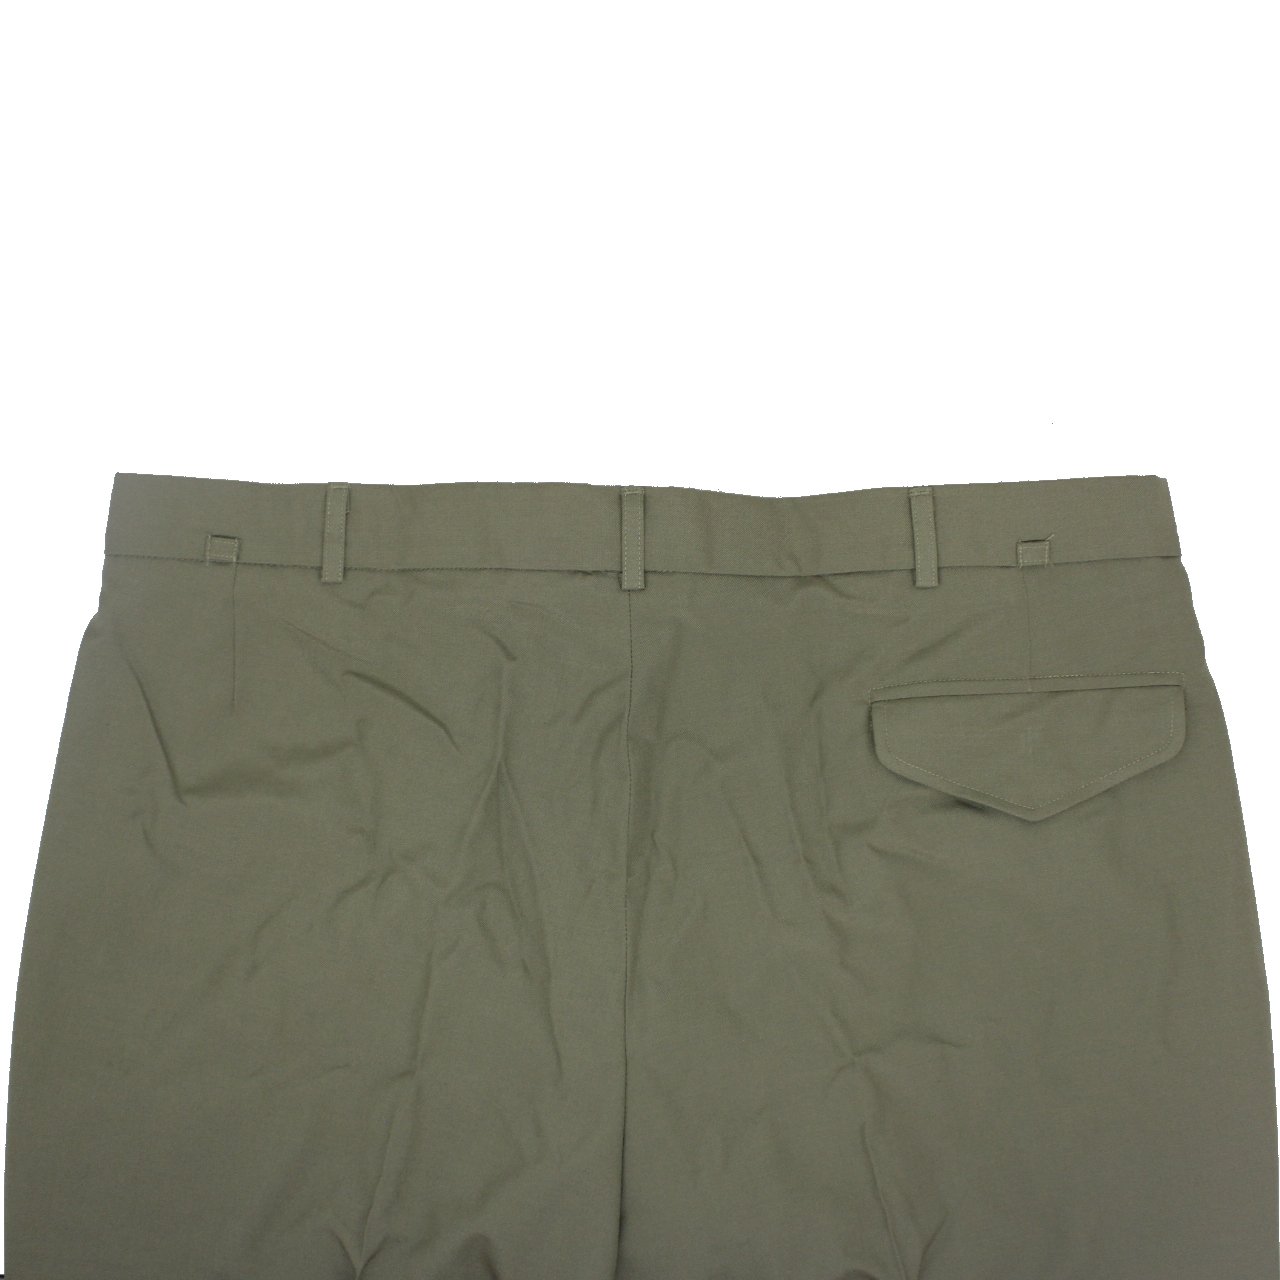 AUSTRALIAN Military Men's Wool Trousers - Browse our Wide Range of ...